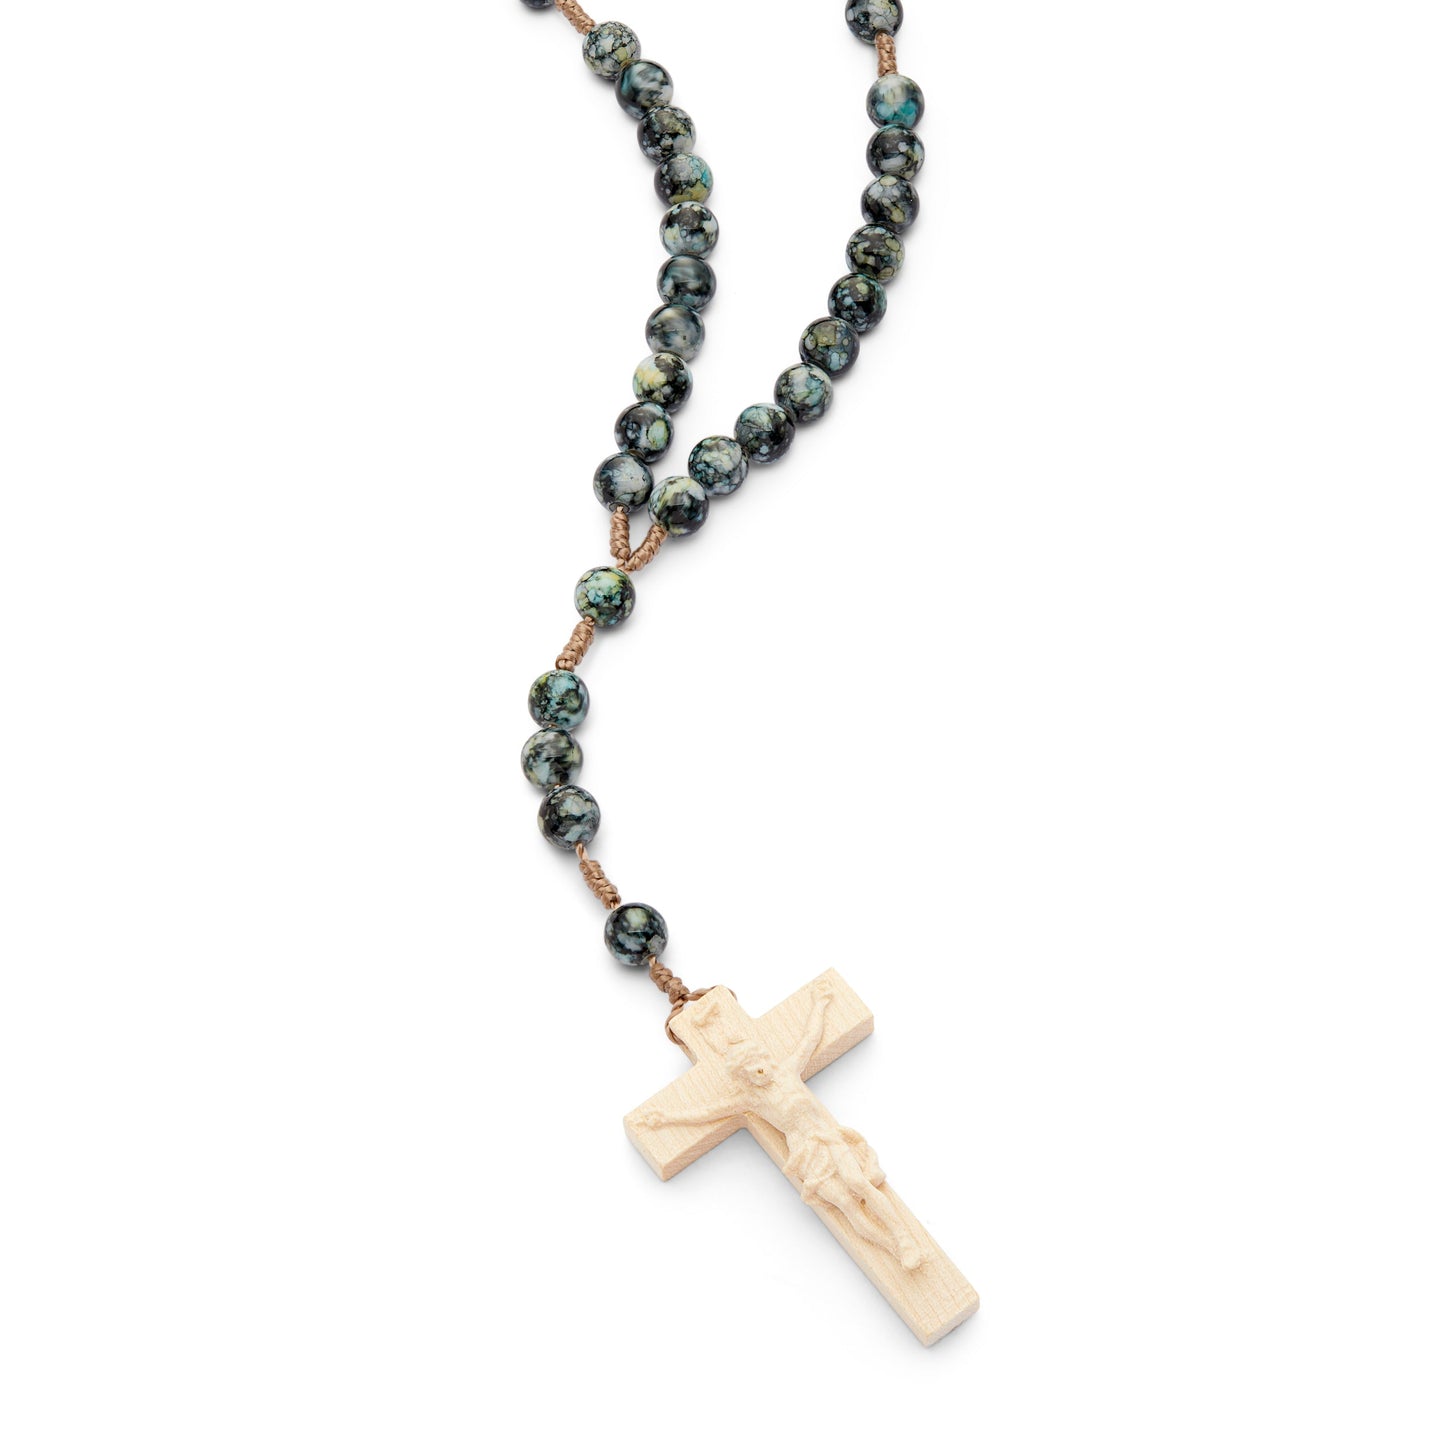 MONDO CATTOLICO Prayer Beads 35.5 cm (13.97 in) / 7 mm (0.27 in) Resin Rosary in Rope with Natural Wood Crucifix